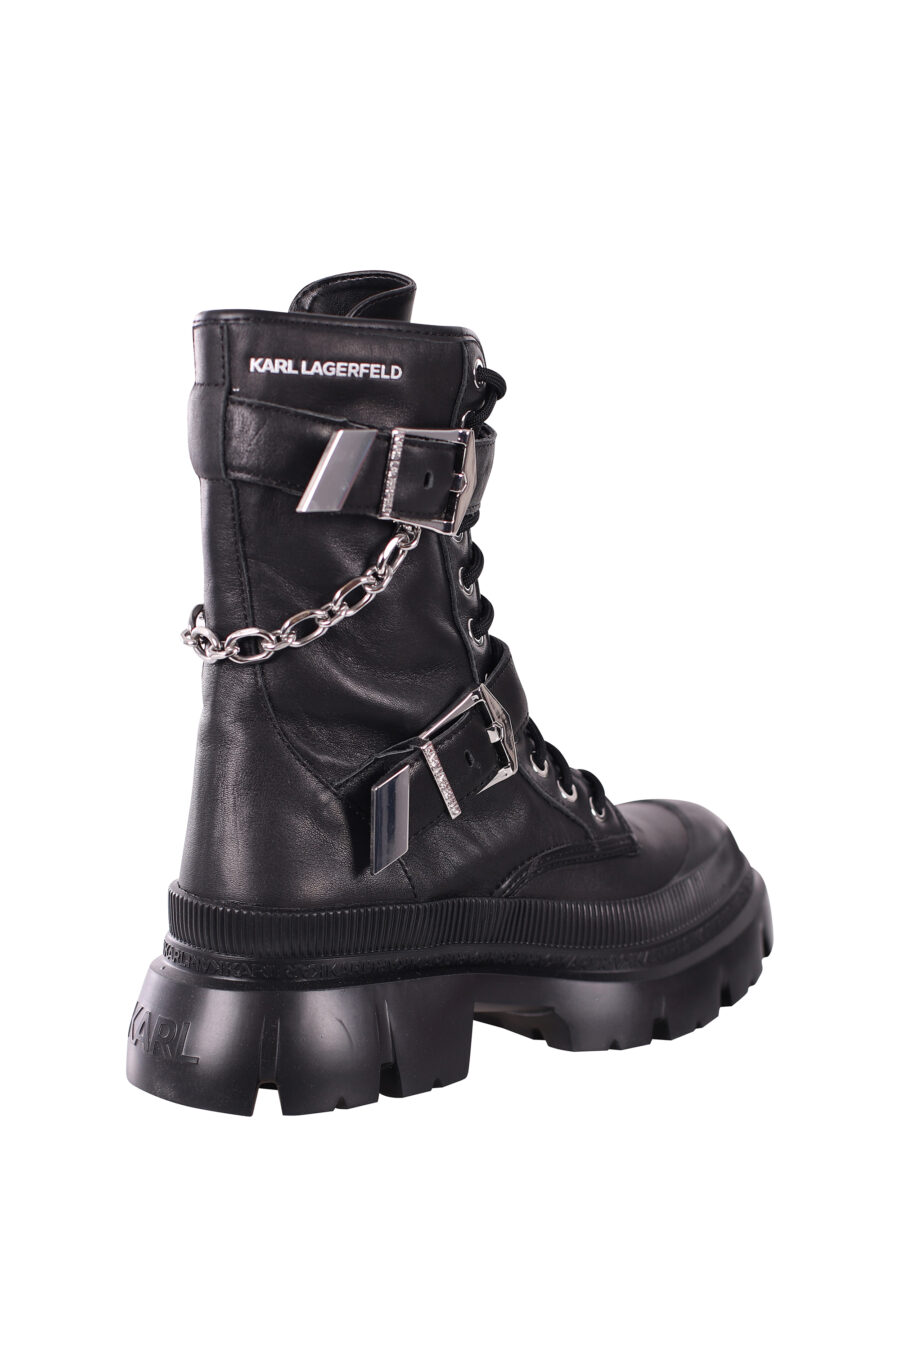 Black ankle boots with chain and silver buckle - IMG 5733